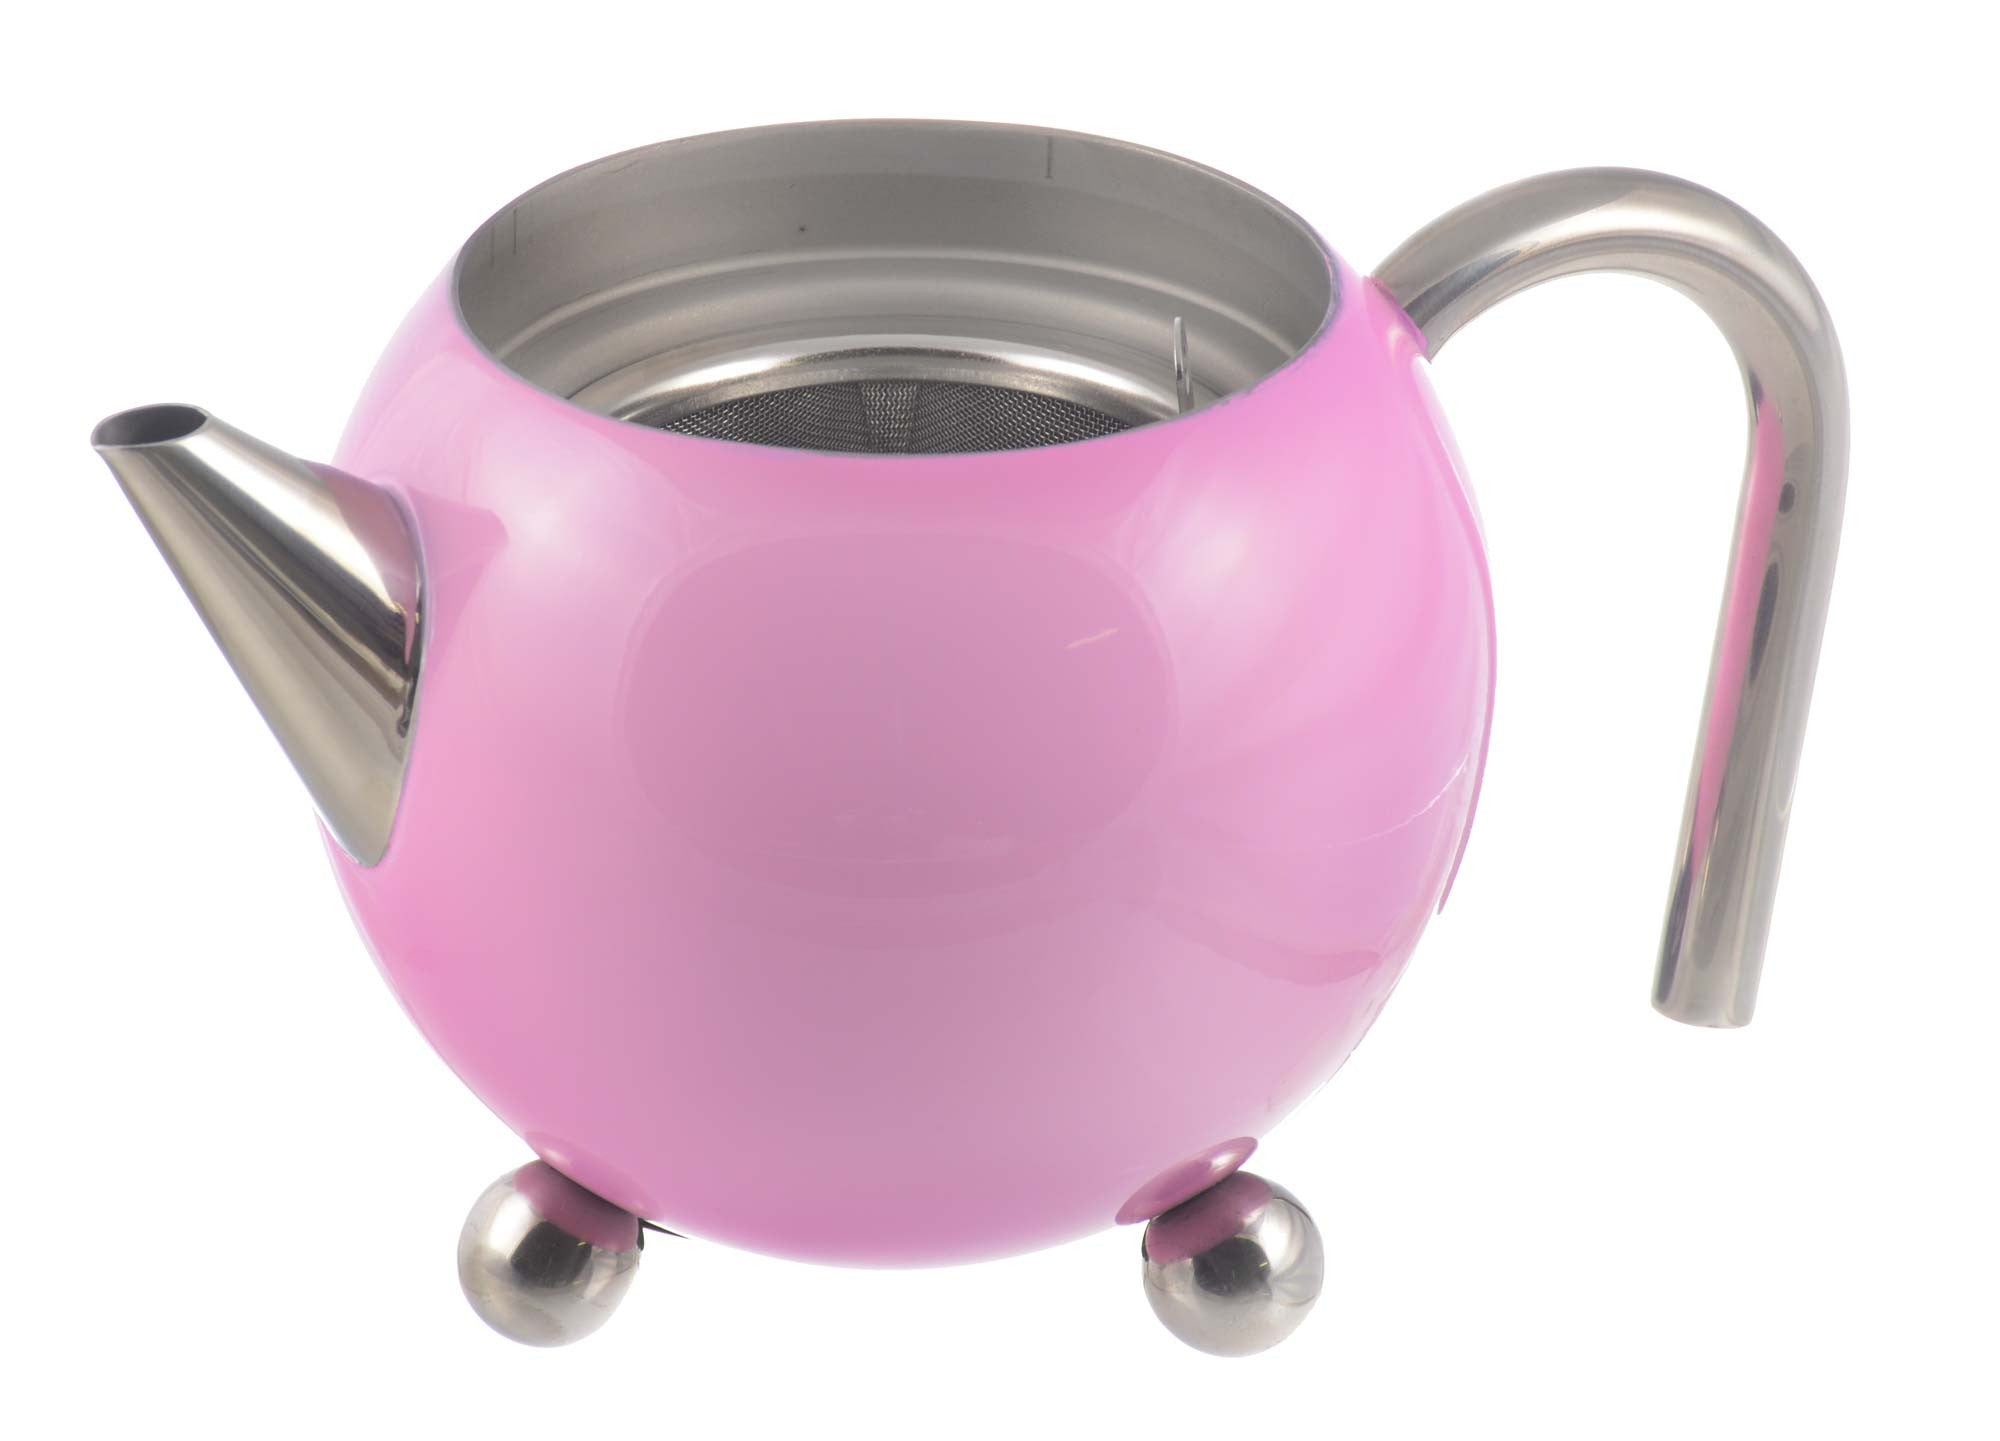  Lurrose Pink Teapot Pink Tea Kettle Whistling Tea Kettle  Stainless Steel Tea Pot for Your Home, Dorm, Apartment: Home & Kitchen